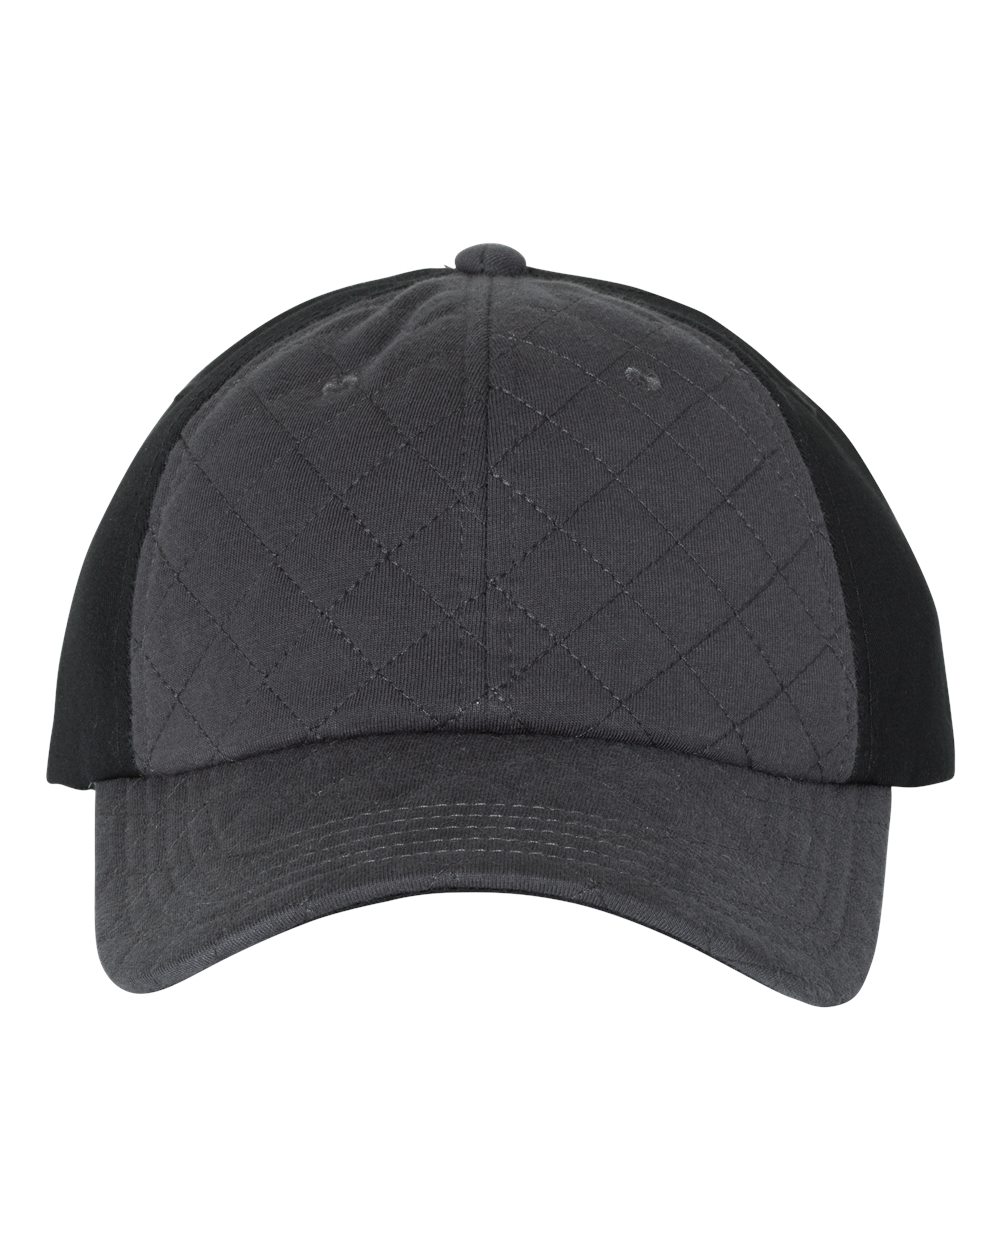 Sportsman - SP960 - Quilted Front Cap